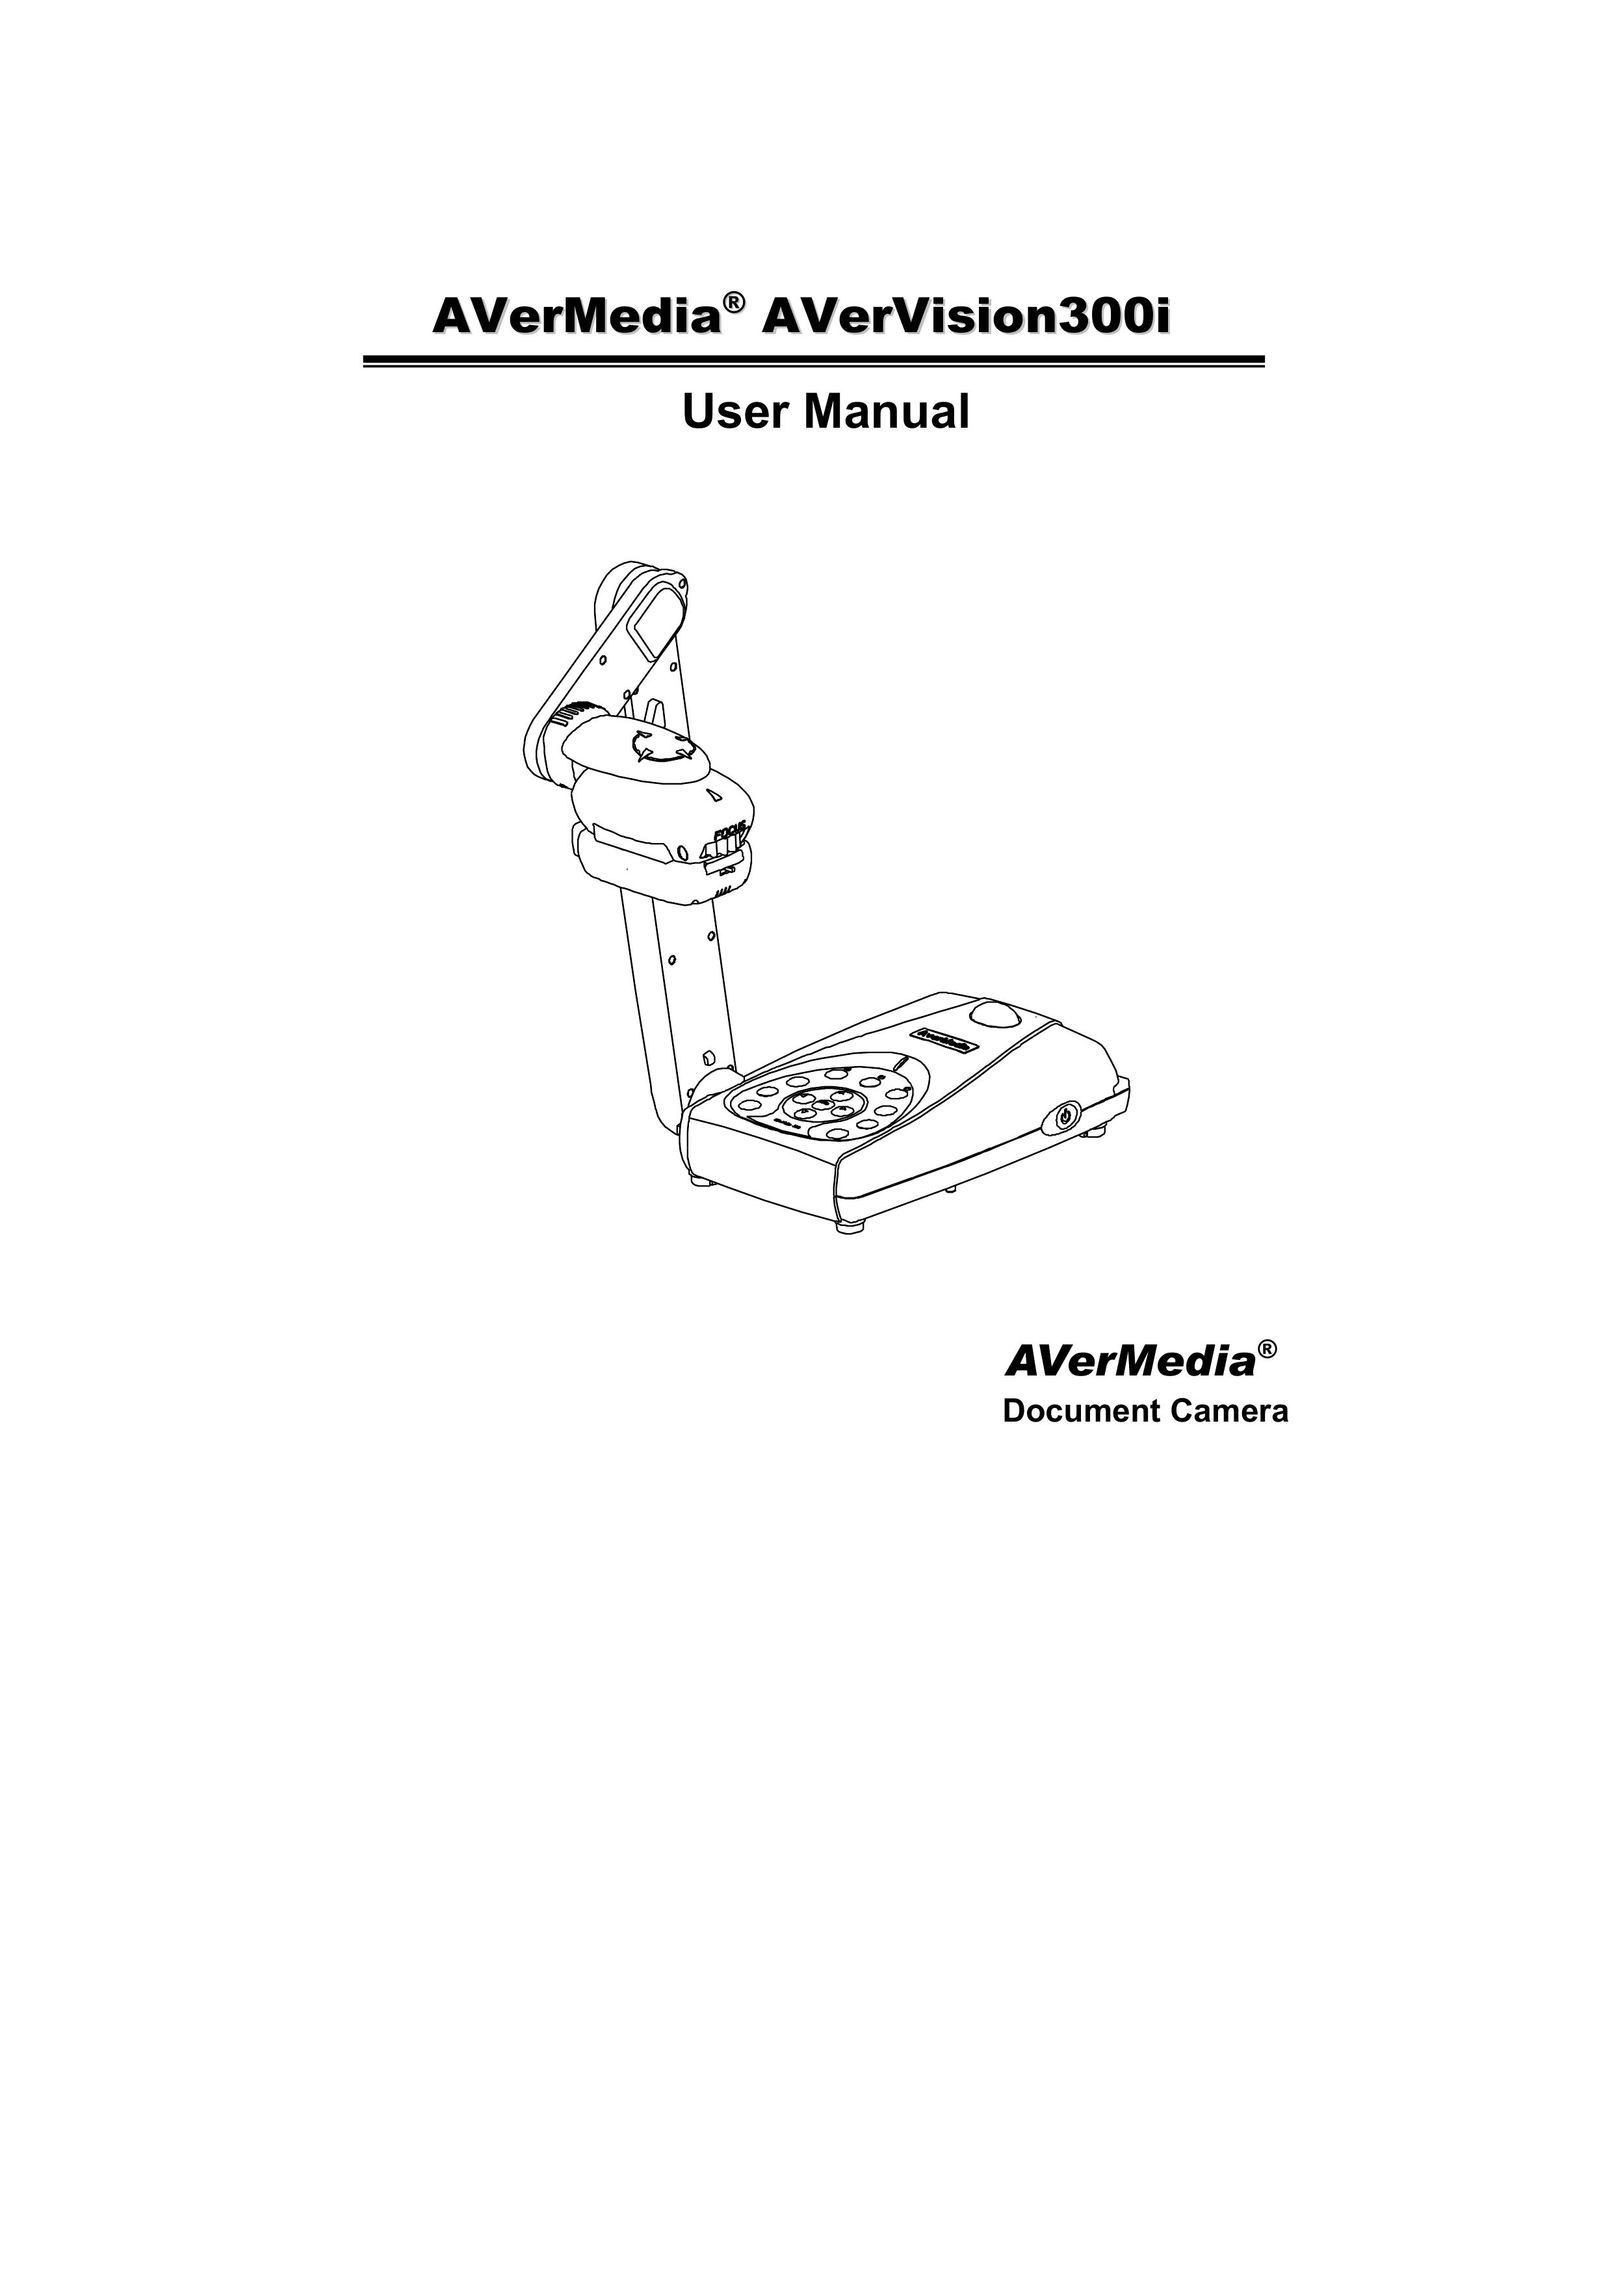 AVerMedia Technologies Document Camera Projection Television User Manual